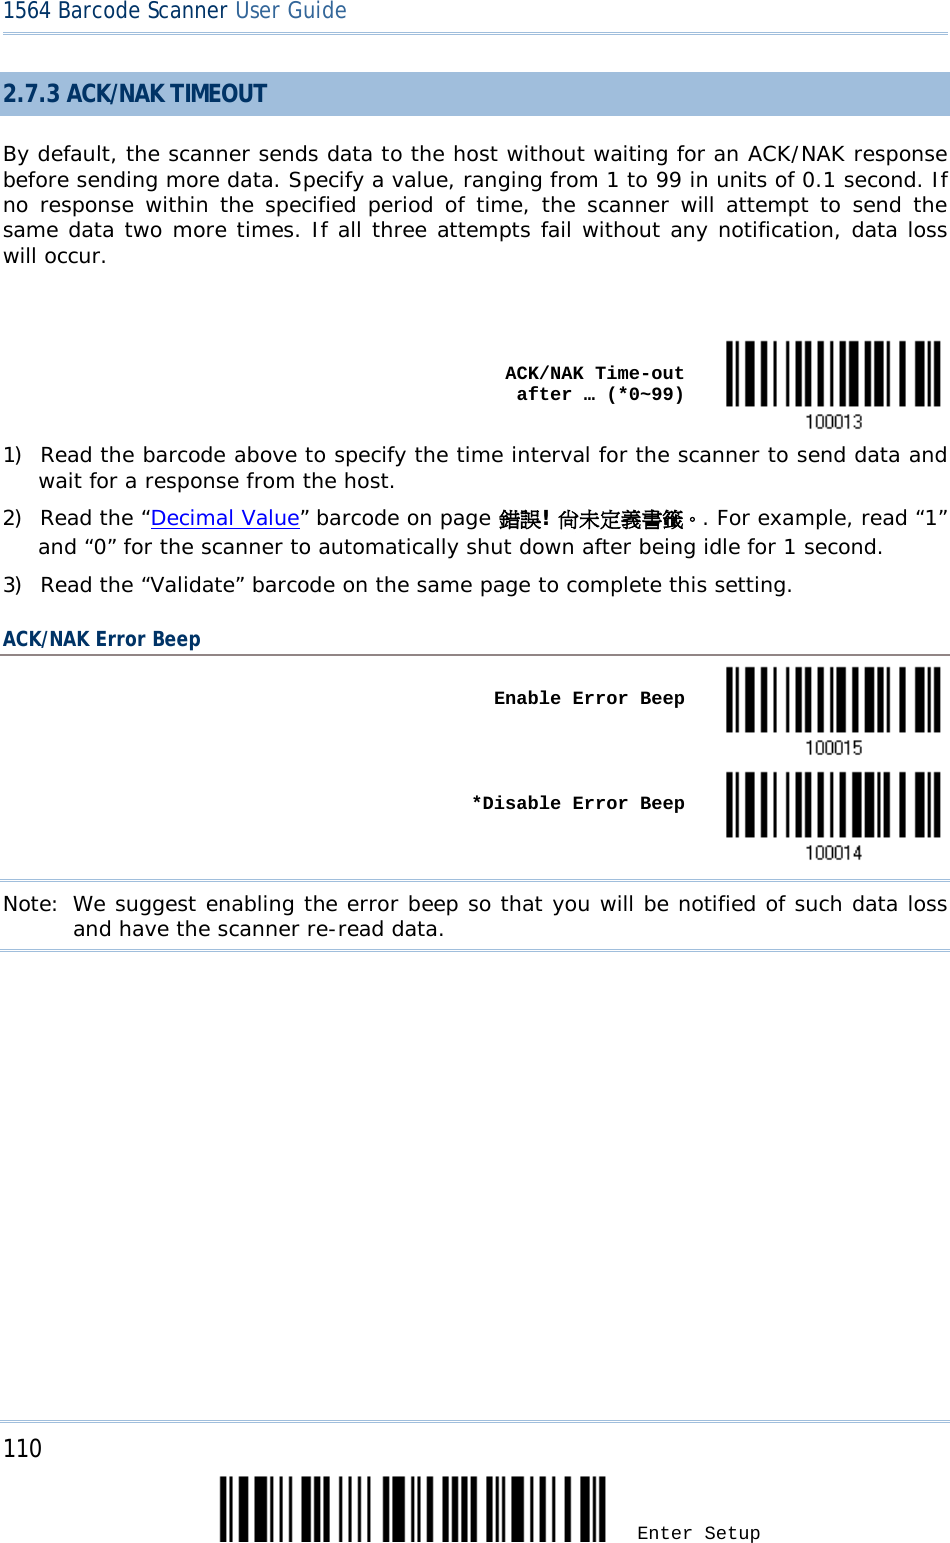 110 Enter Setup 1564 Barcode Scanner User Guide  2.7.3 ACK/NAK TIMEOUT By default, the scanner sends data to the host without waiting for an ACK/NAK response before sending more data. Specify a value, ranging from 1 to 99 in units of 0.1 second. If no response within the specified period of time, the scanner will attempt to send the same data two more times. If all three attempts fail without any notification, data loss will occur.     ACK/NAK Time-out after … (*0~99)  1) Read the barcode above to specify the time interval for the scanner to send data and wait for a response from the host.       2) Read the “Decimal Value” barcode on page 錯誤! 尚未定義書籤。. For example, read “1” and “0” for the scanner to automatically shut down after being idle for 1 second.  3) Read the “Validate” barcode on the same page to complete this setting. ACK/NAK Error Beep    Enable Error Beep       *Disable Error Beep  Note: We suggest enabling the error beep so that you will be notified of such data loss and have the scanner re-read data.       